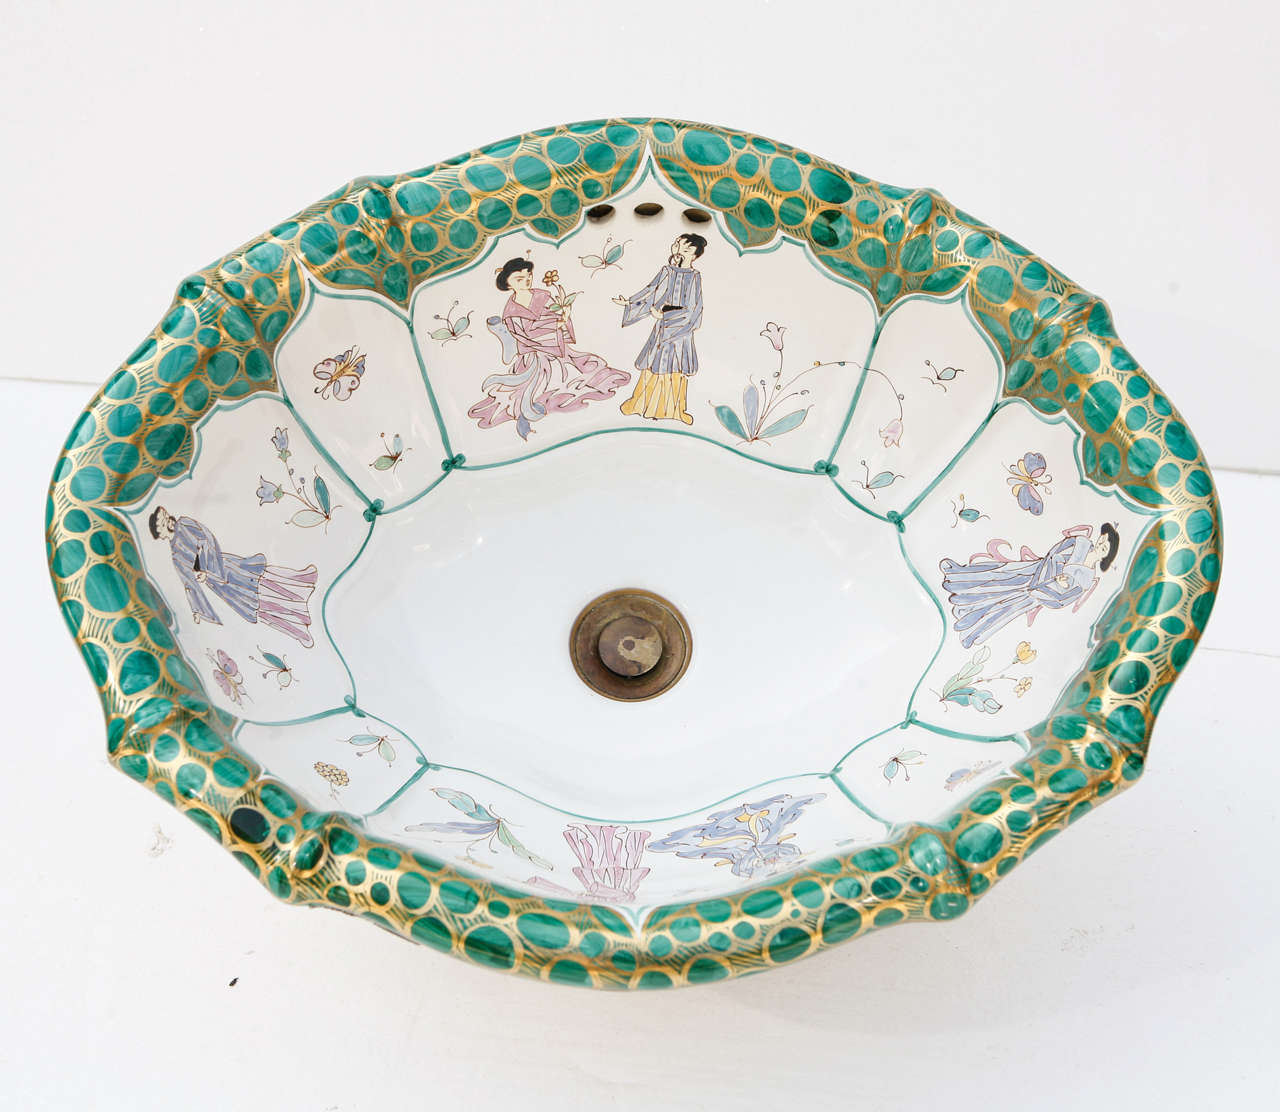 Vintage Sherle Wagner Chinosierie Sink. Uncertain of manufacture date, but made in Italy.  Two available.
Please contact Fernworks (fernworksantiques@msn.com) for trade pricing and shipping options.